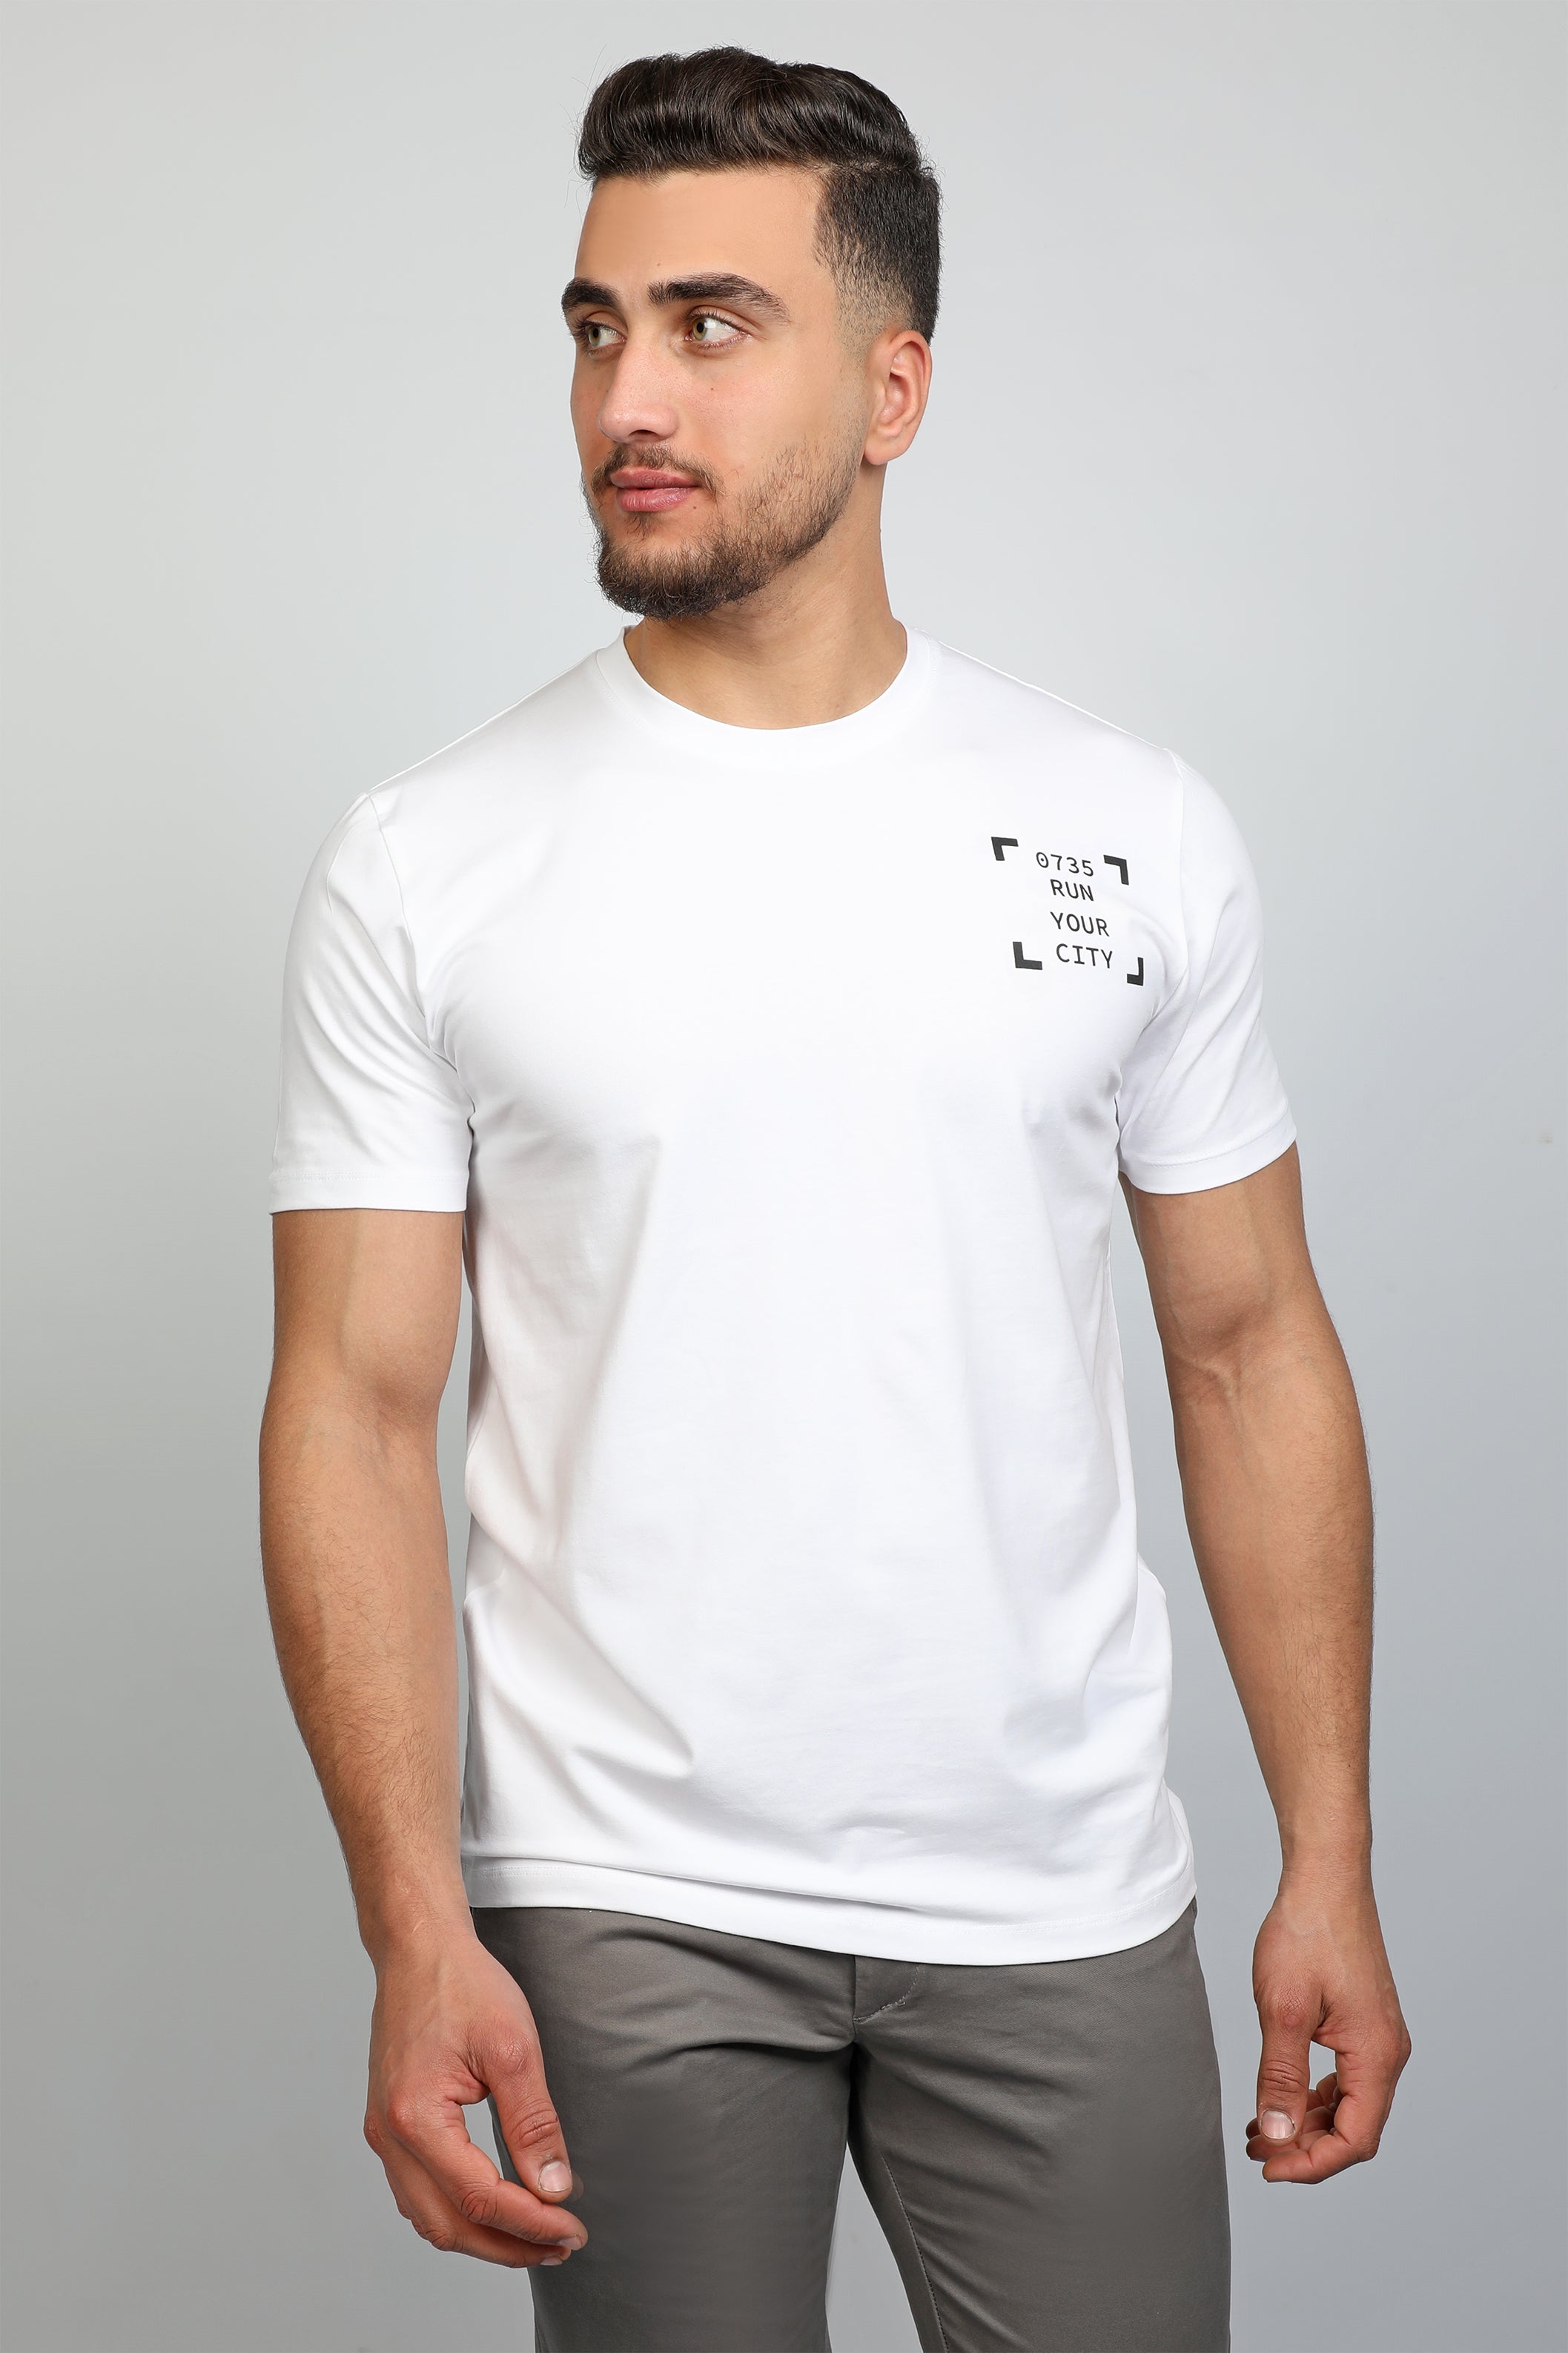 White T-shirt With Printed Front and back Design